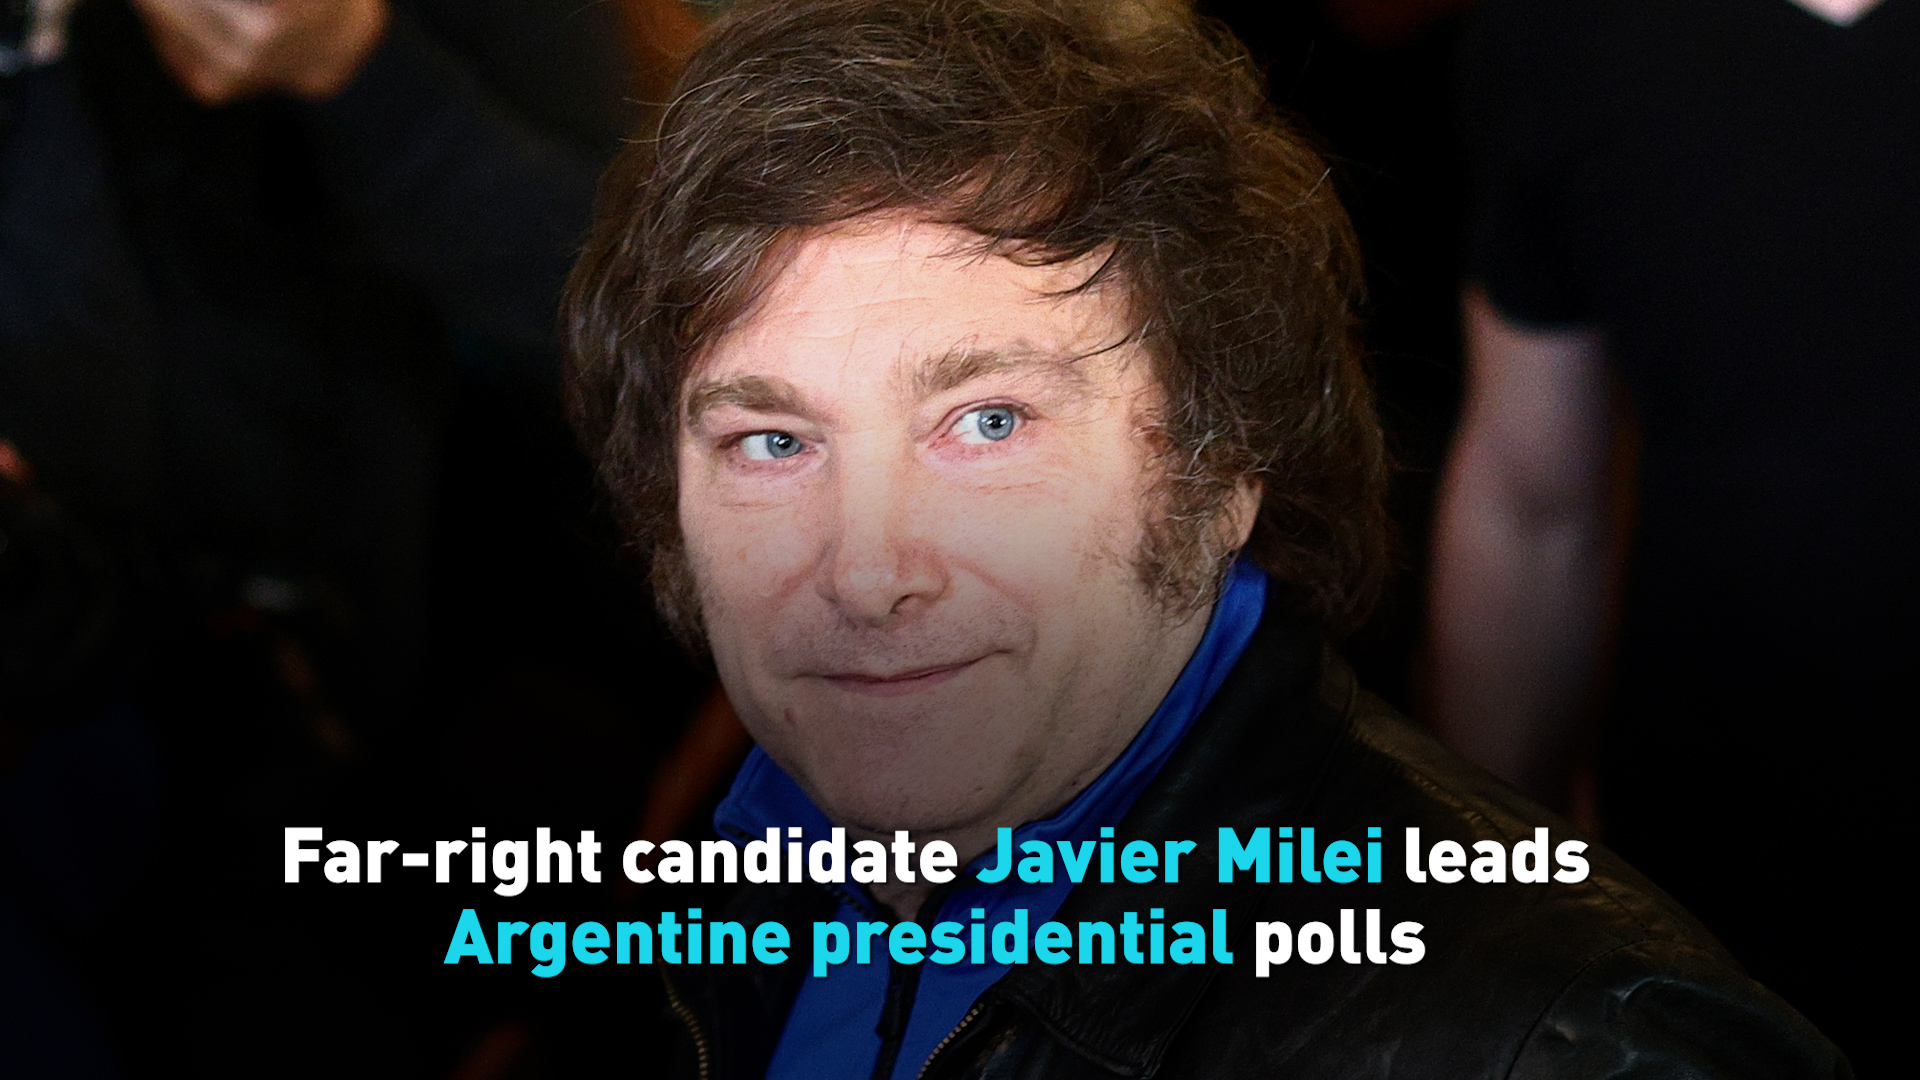 Meet the Candidates: Argentina